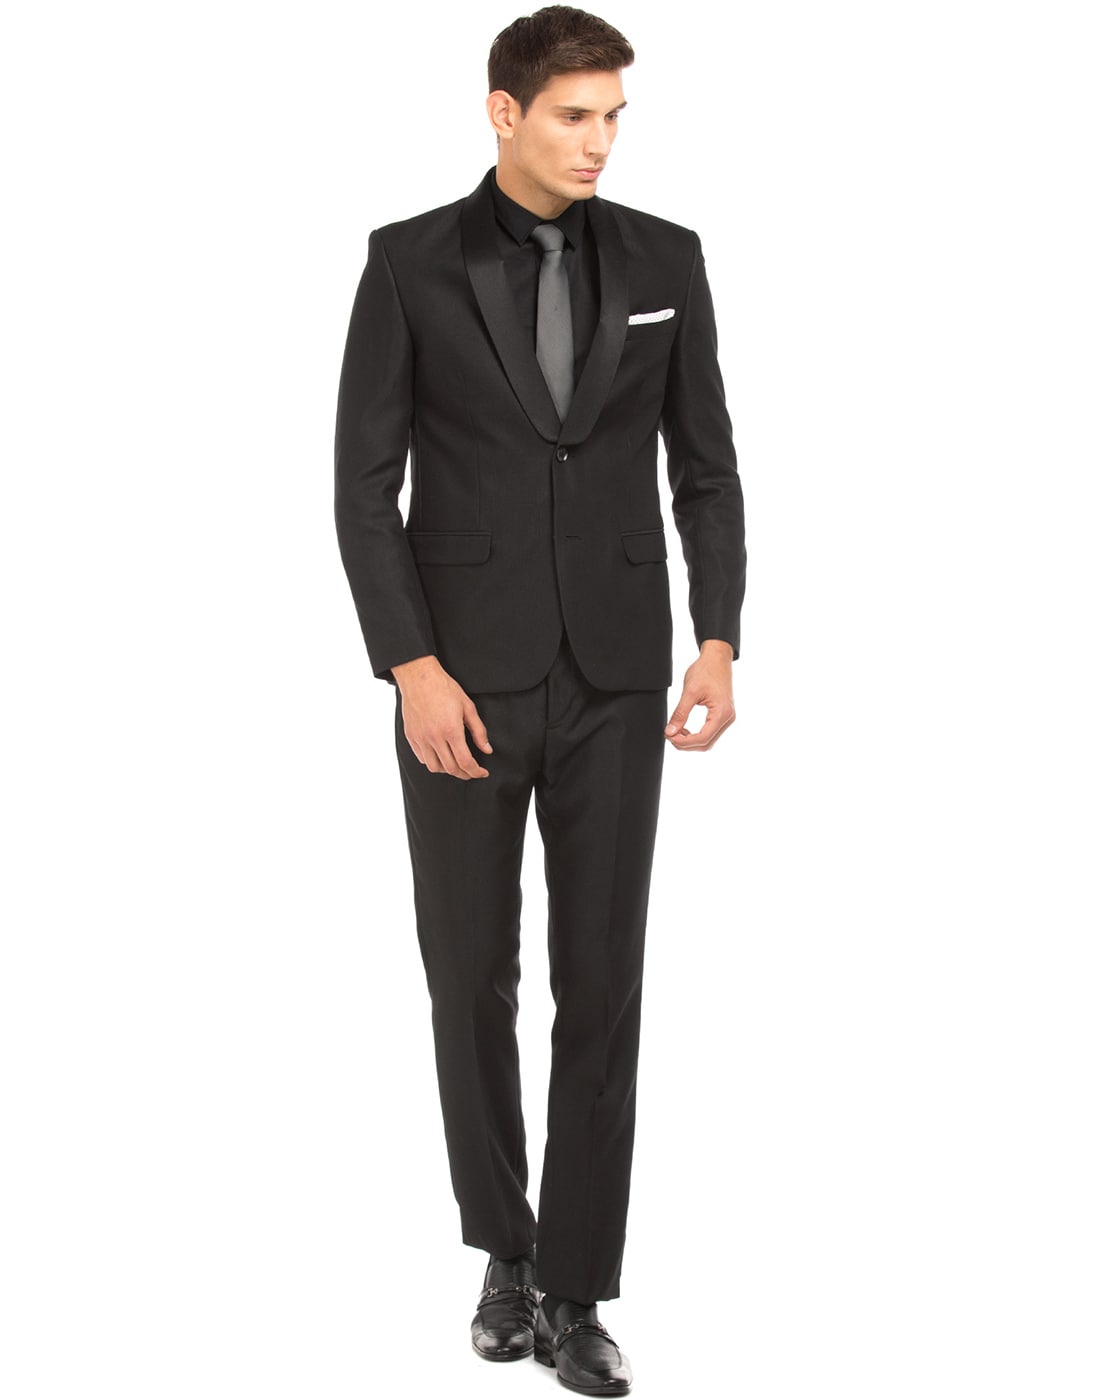 NNNOW.com Sale - suits blazers nw - Shop Online at Lowest Price in India